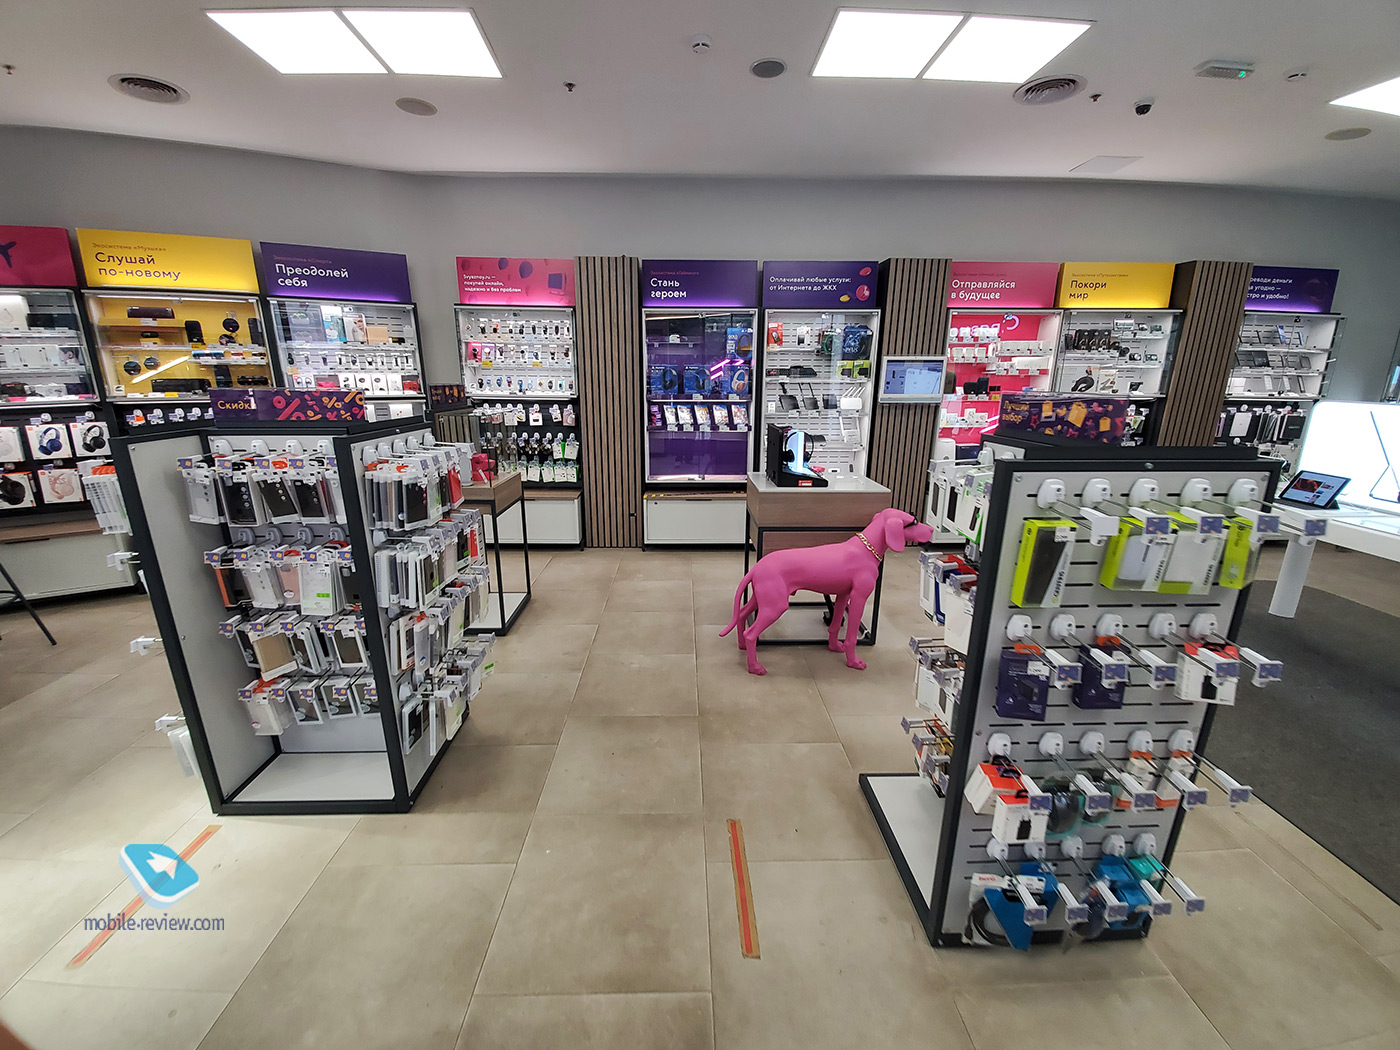 New retail store format from Svyaznoy - Flex, or flexible spaces